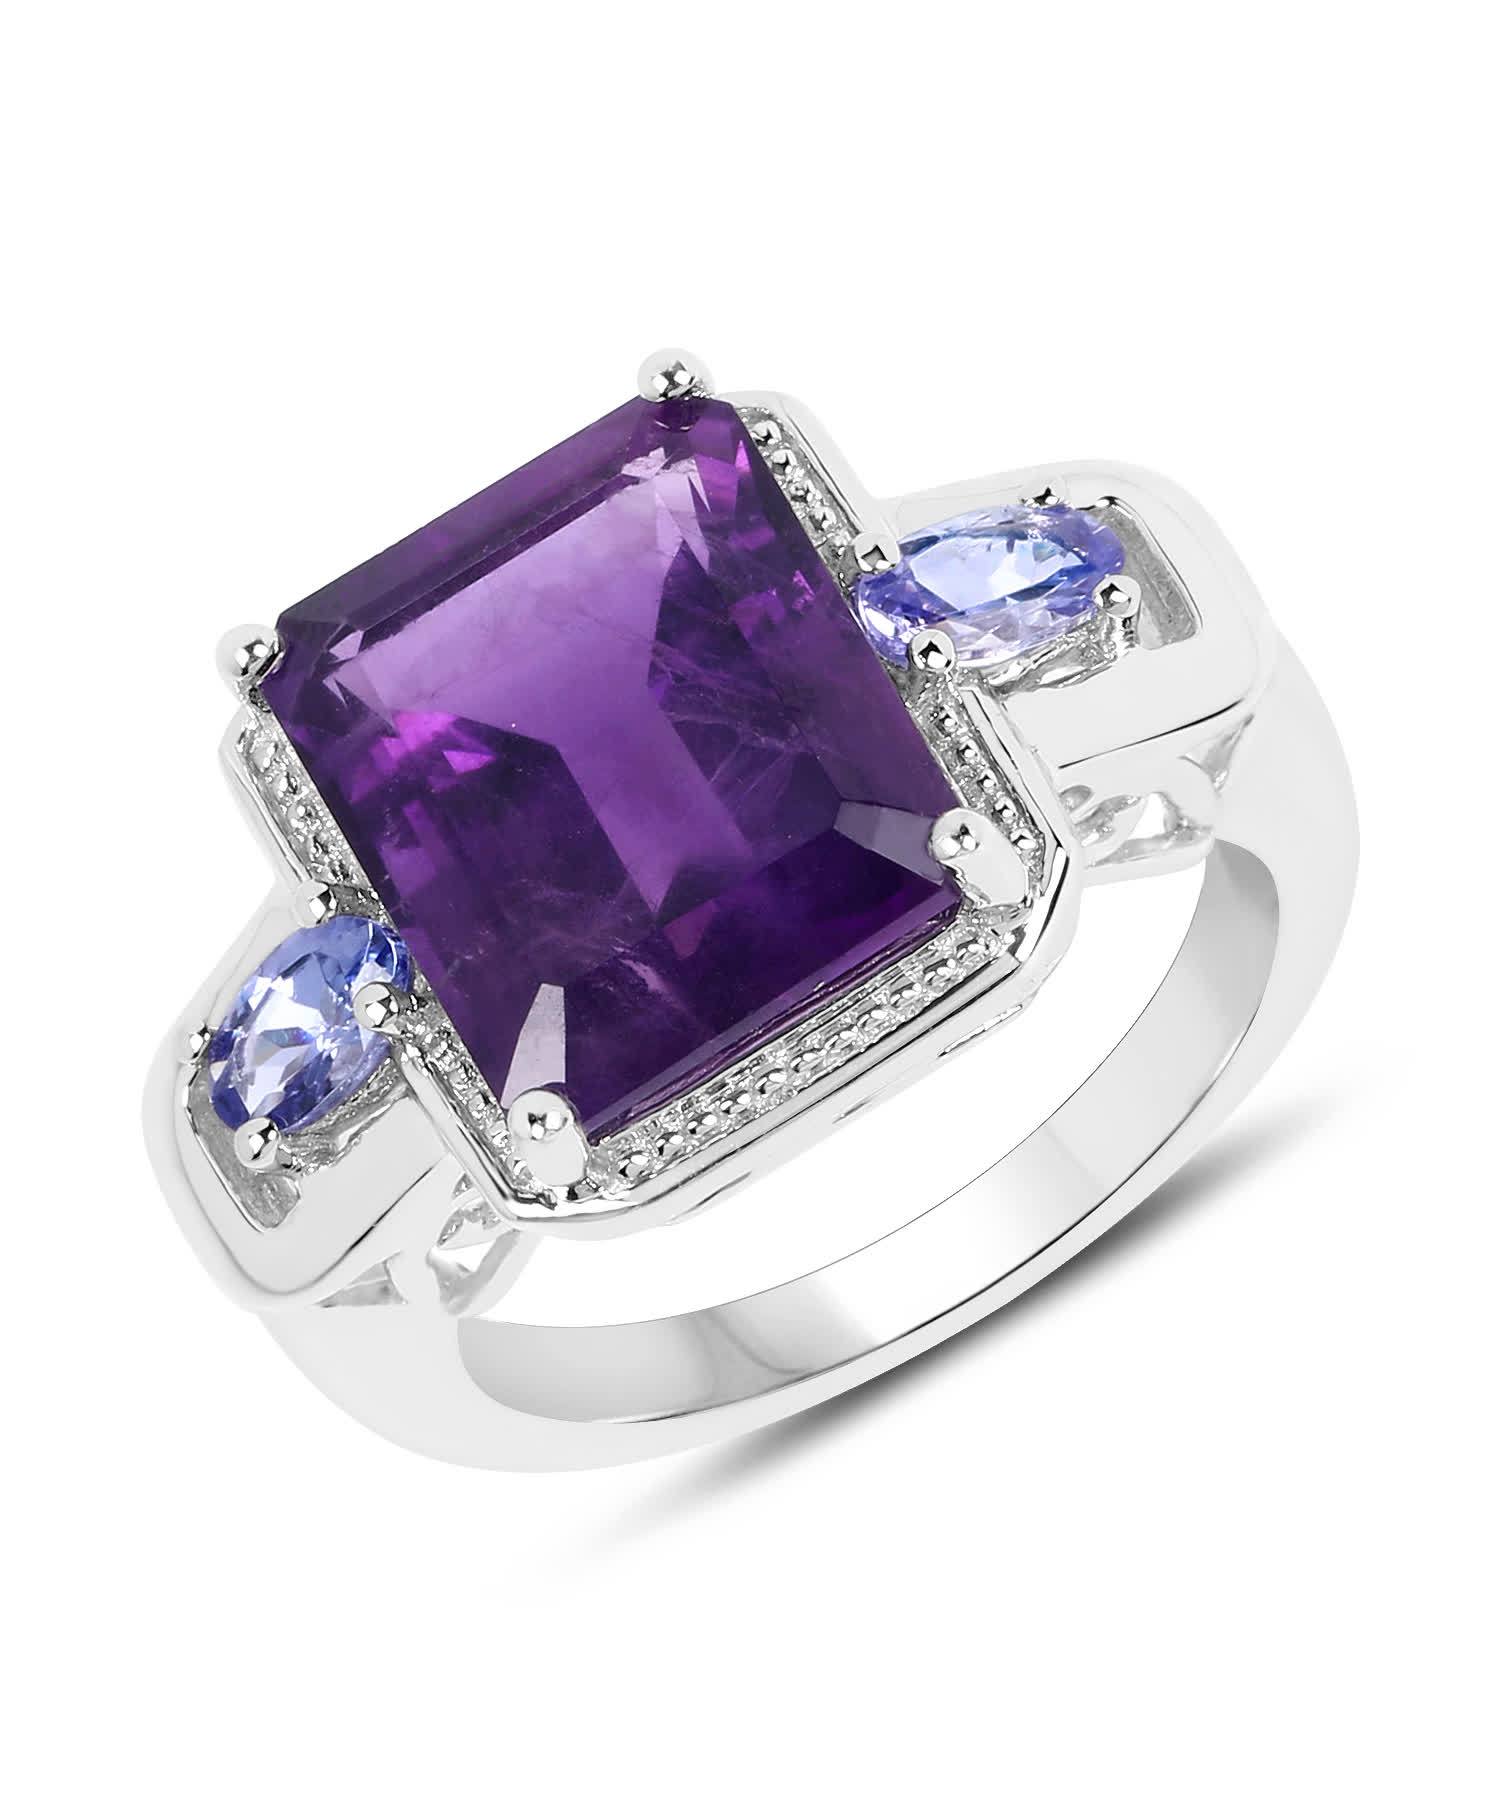 5.15ctw Natural Amethyst and Tanzanite Rhodium Plated 925 Sterling Silver Fashion Cocktail Ring View 1